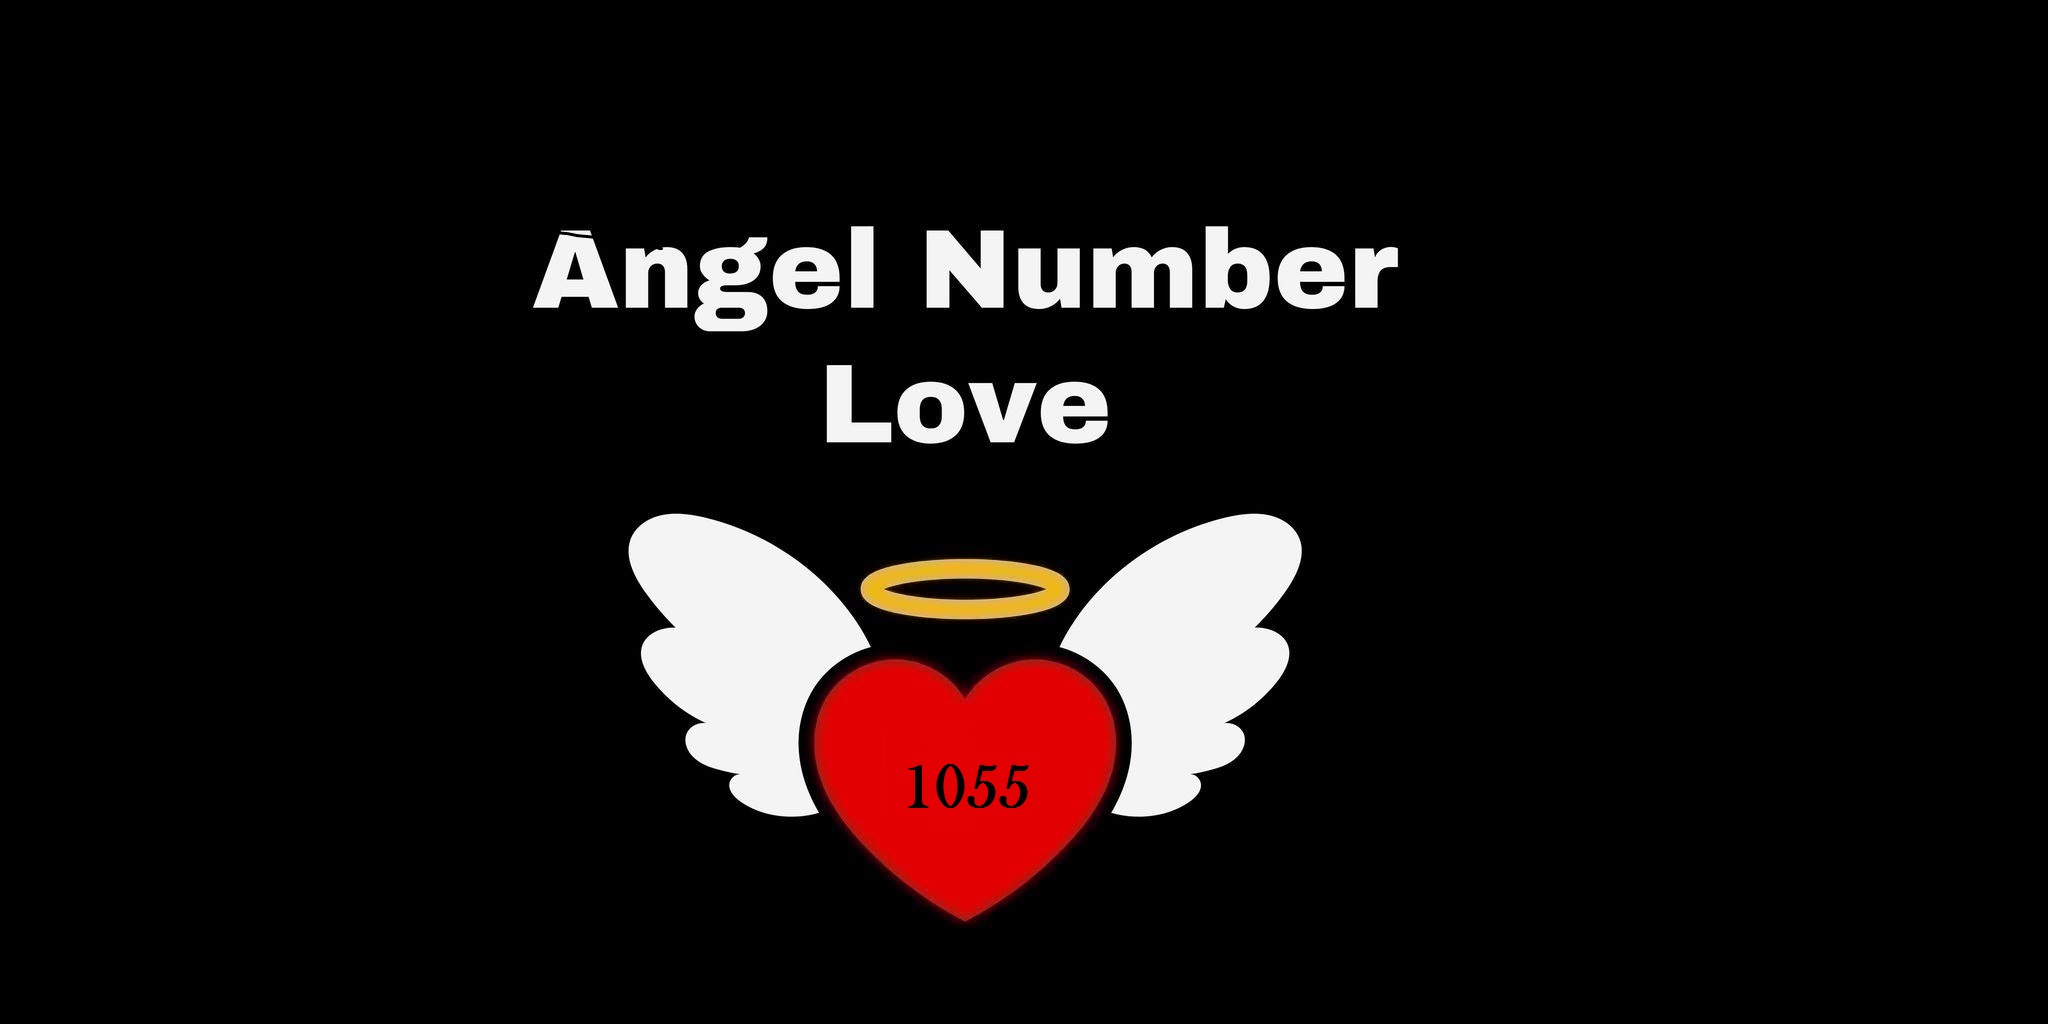 1055 Angel Number Meaning In Love & Relationship